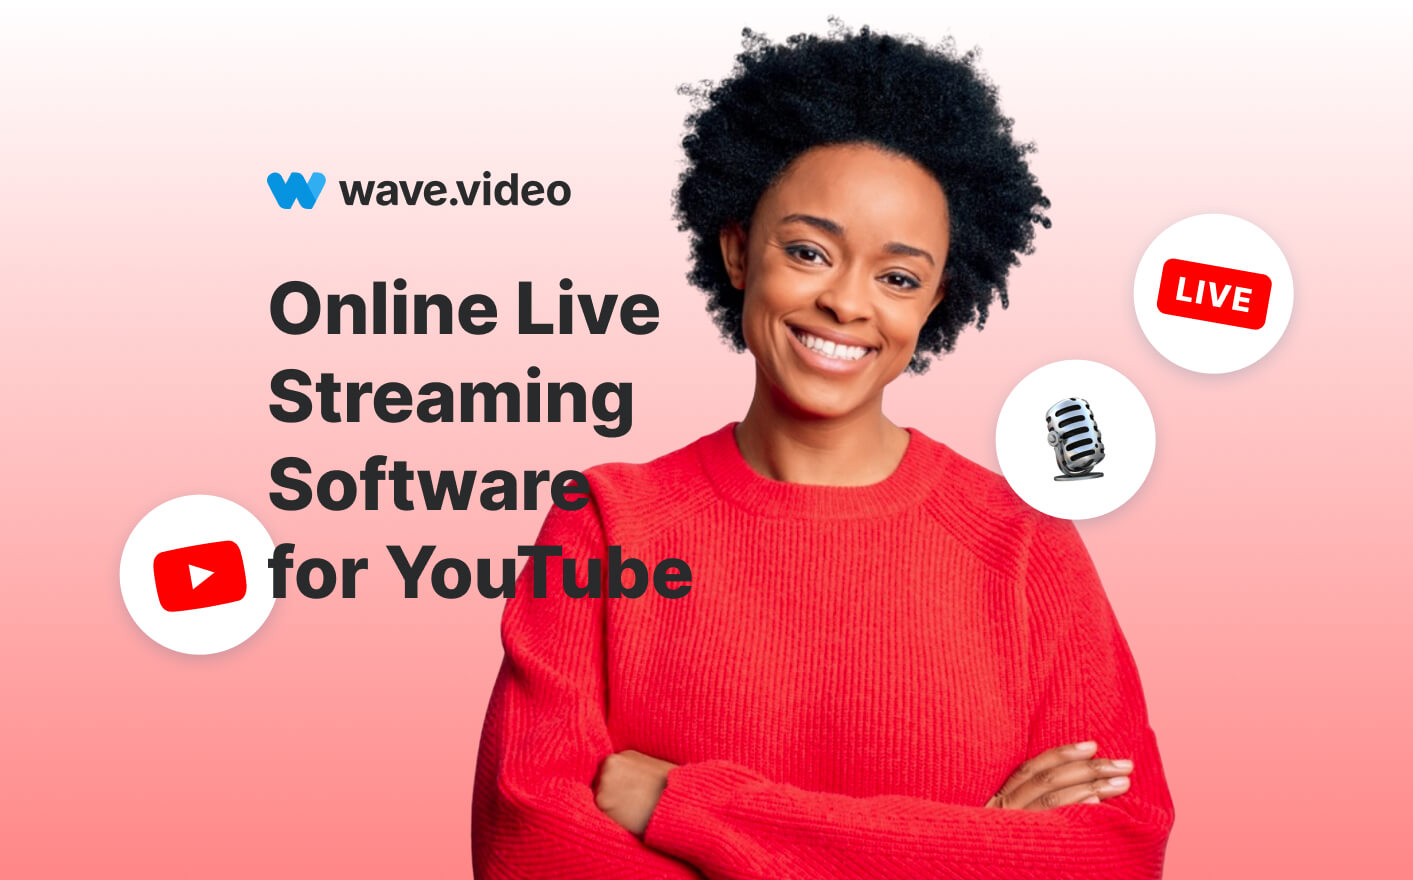 Live Streaming Software for YouTube Wave.video